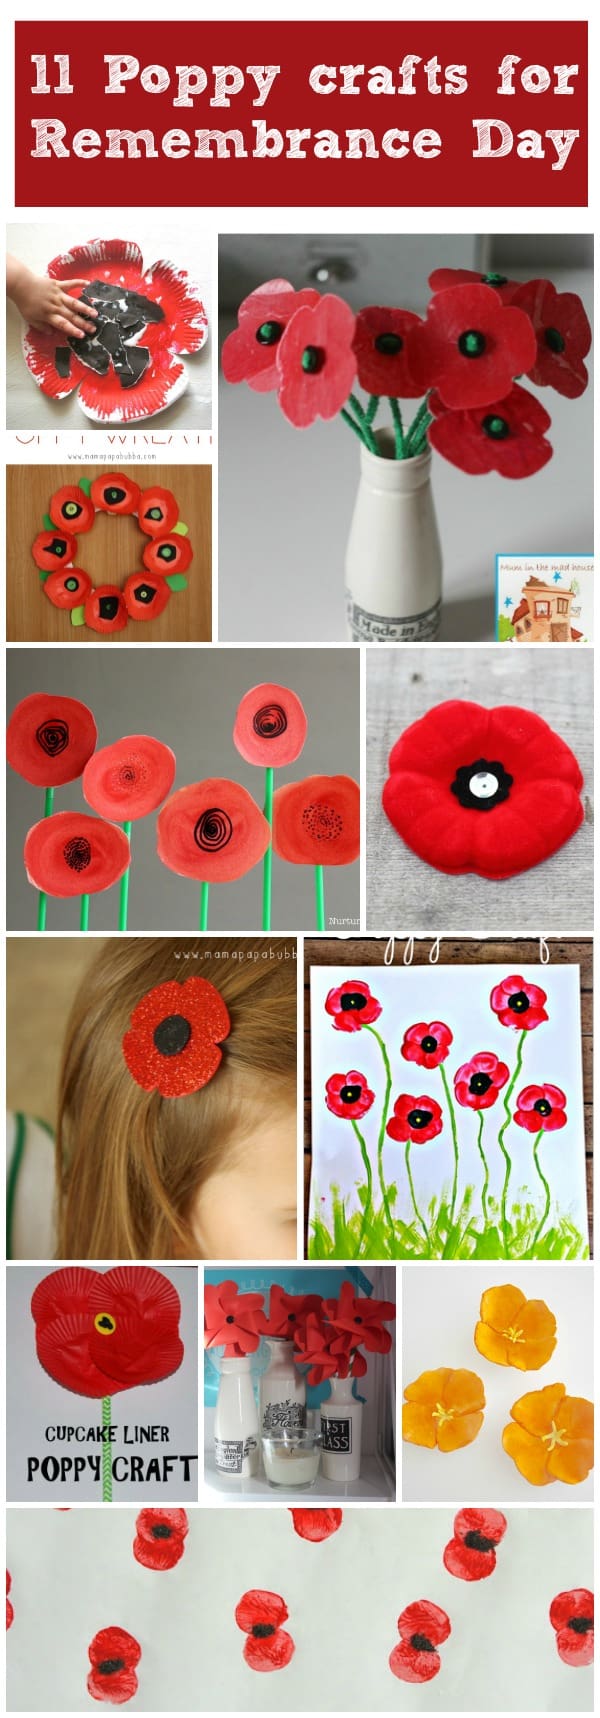 11 more Poppy crafts for Remembrance Day